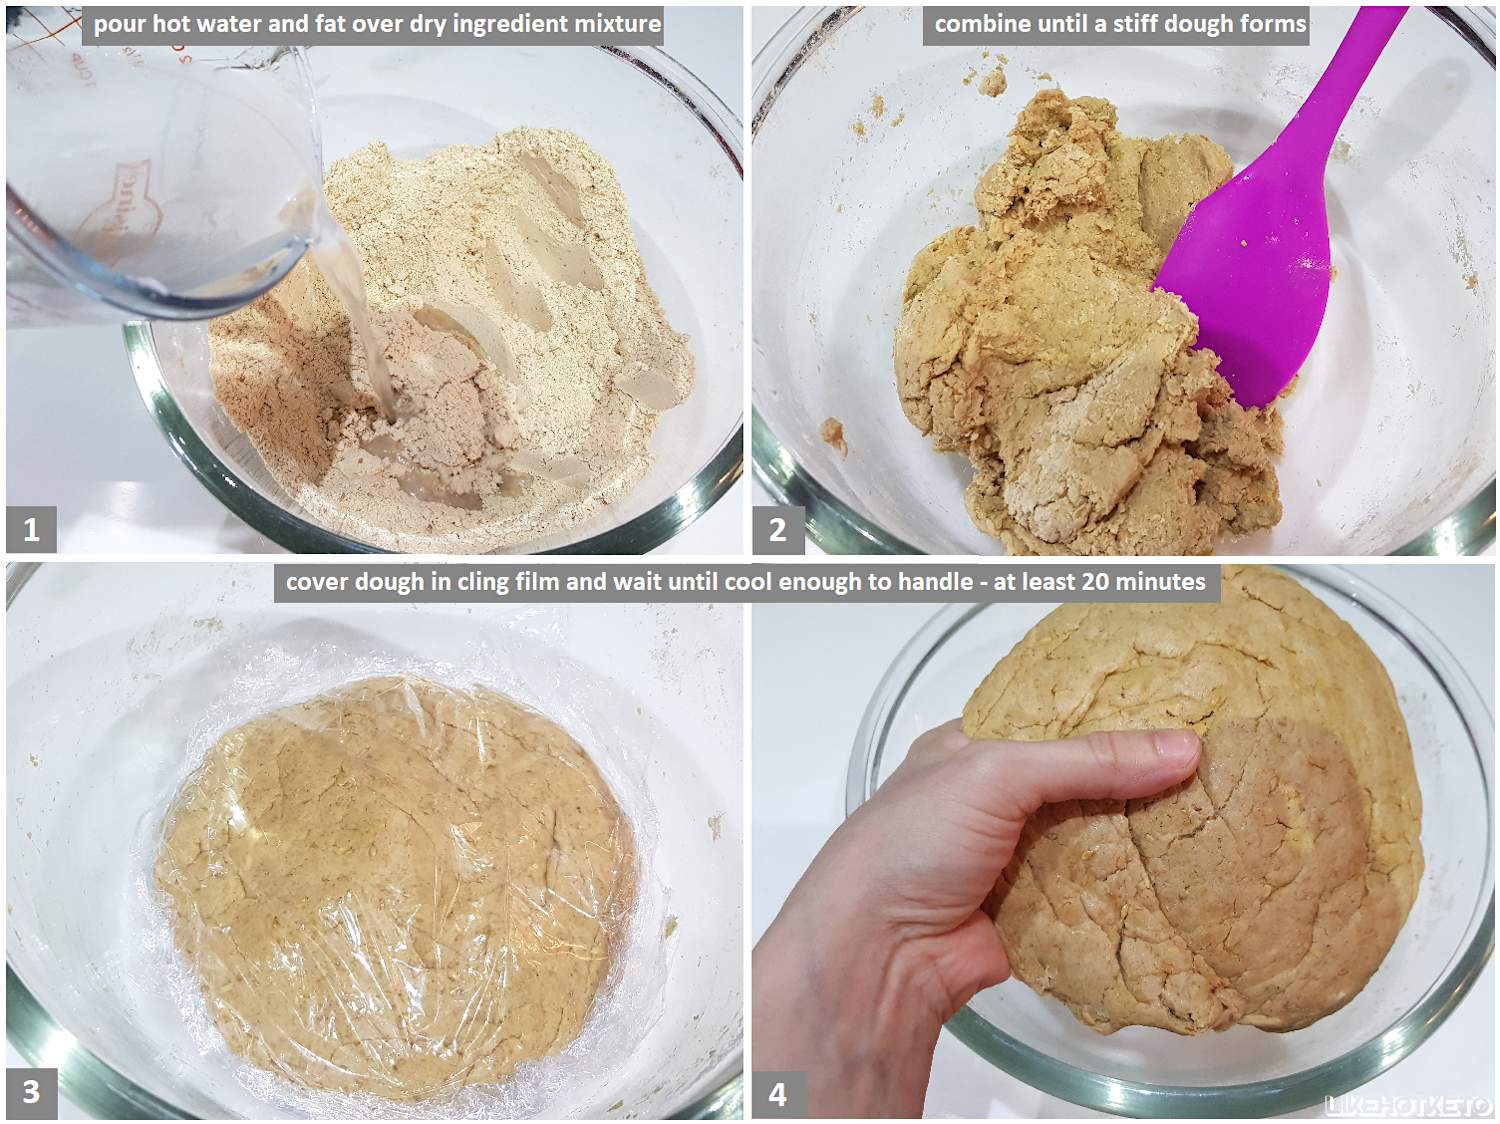 Step by step images of how to make flax meal and pea protein keto tortilla wraps, showing addition of hot water and fat to flour mixture, mixing until dough forms, and letting the keto tortilla dough rest while covered in cling film.